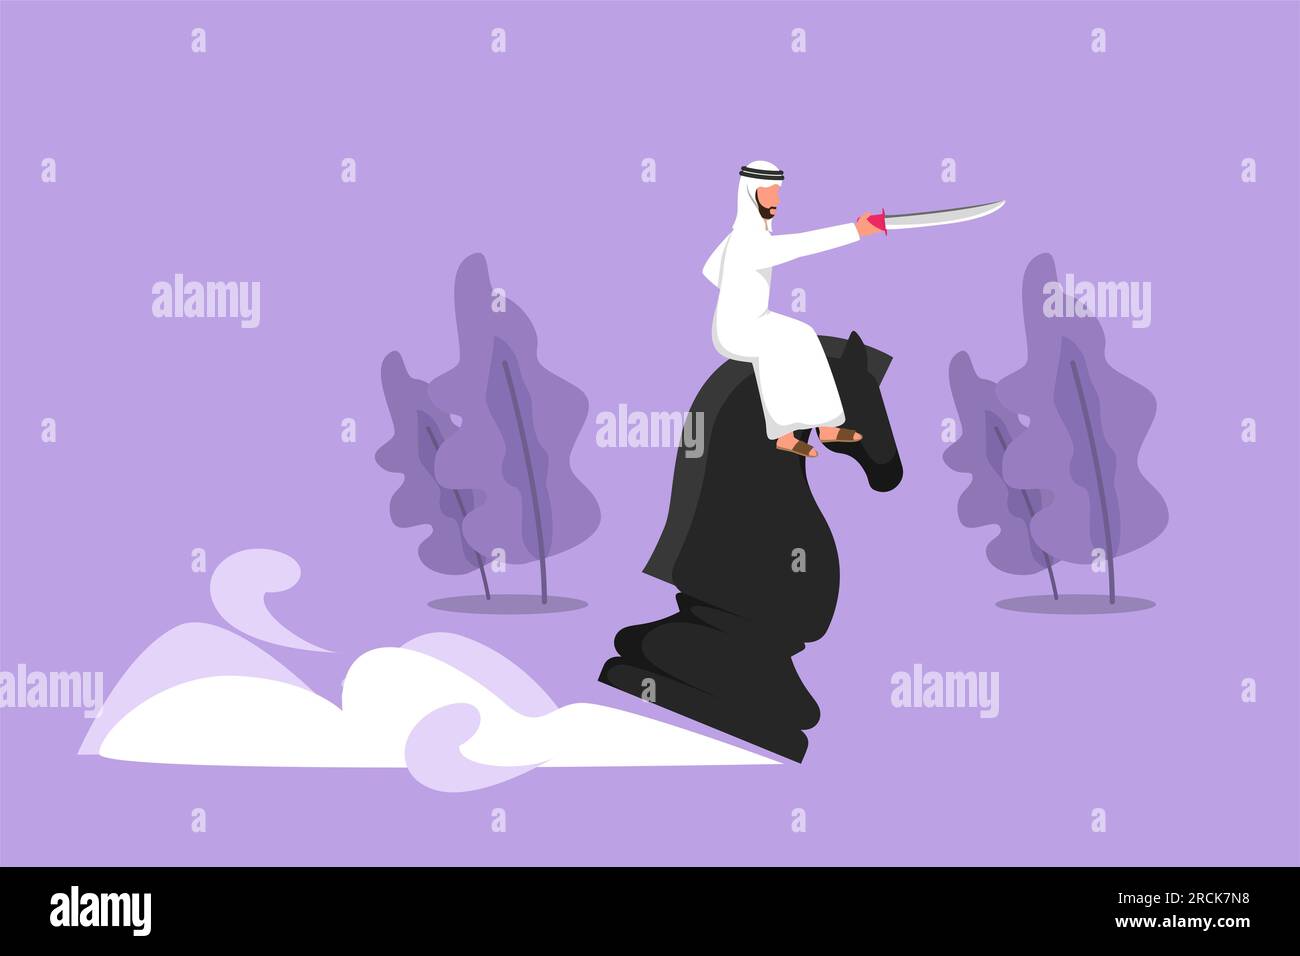 Character flat drawing competitive Arab businessman riding big chess horse knight with sword. Idea, business strategy, winning competition, achievemen Stock Photo